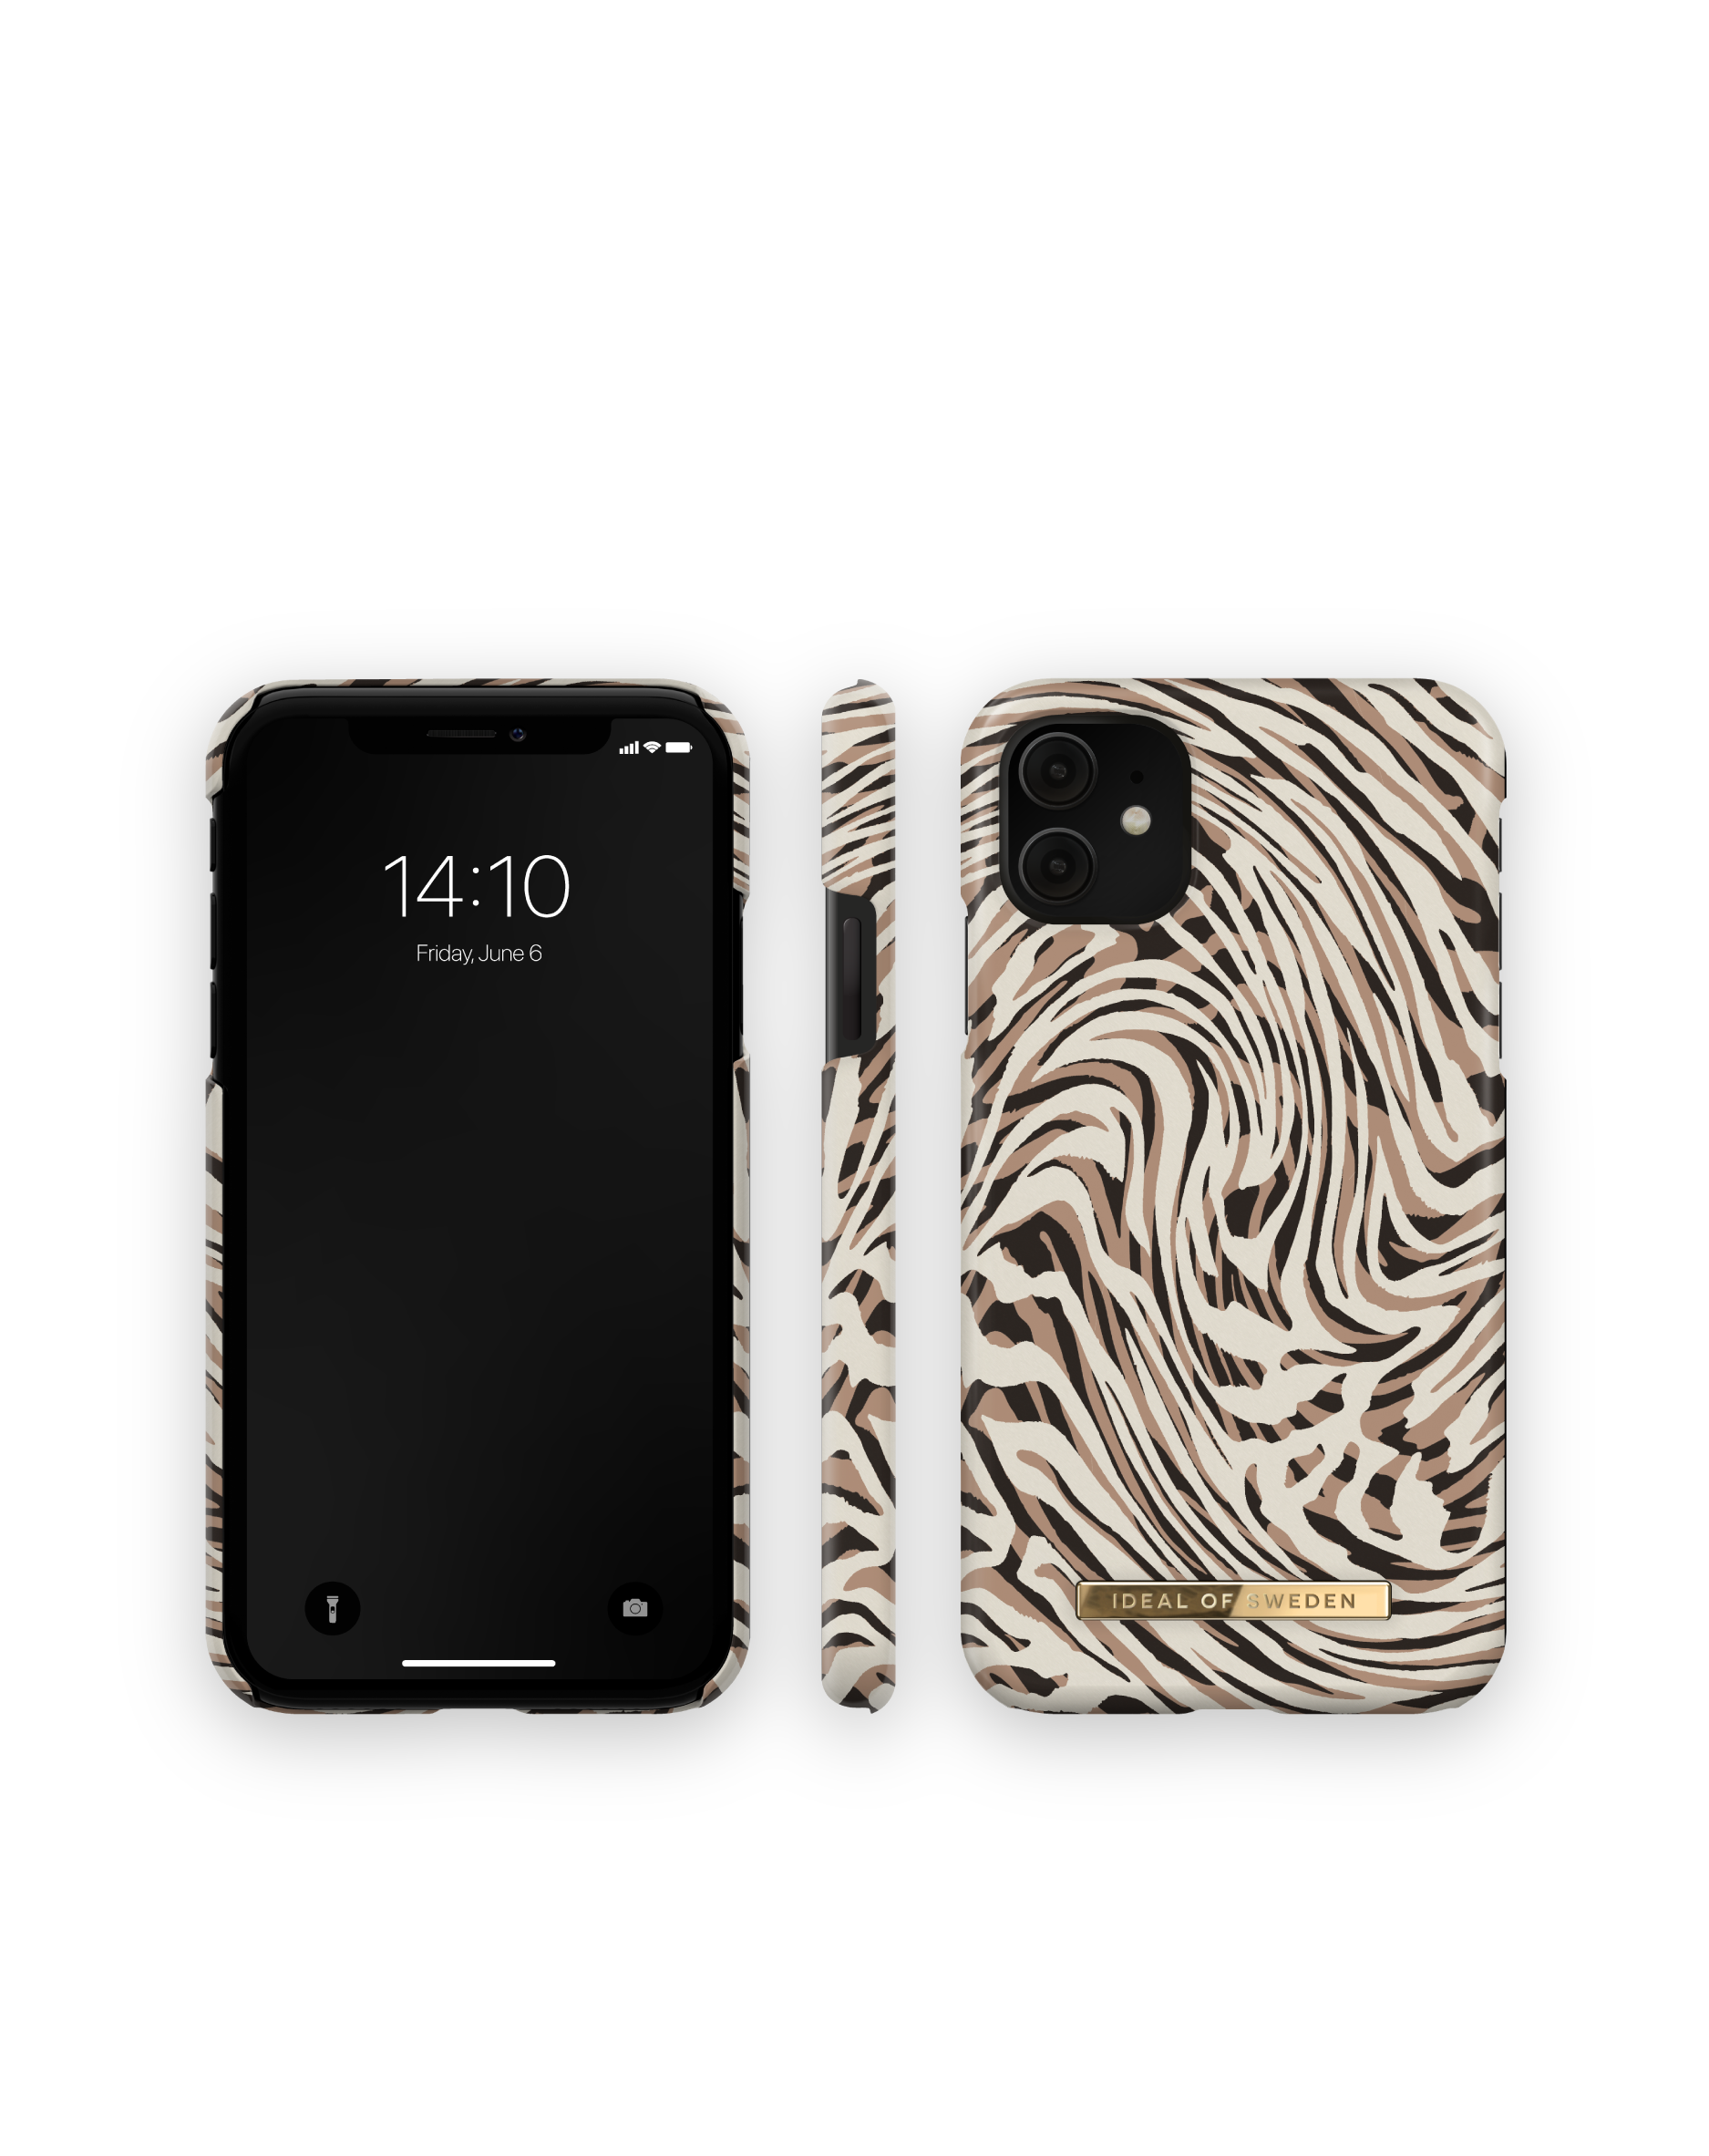 IDEAL OF SWEDEN IDFCSS22-I1961-392, Backcover, Zebra 11 / Apple, Hypnotic iPhone iPhone XR